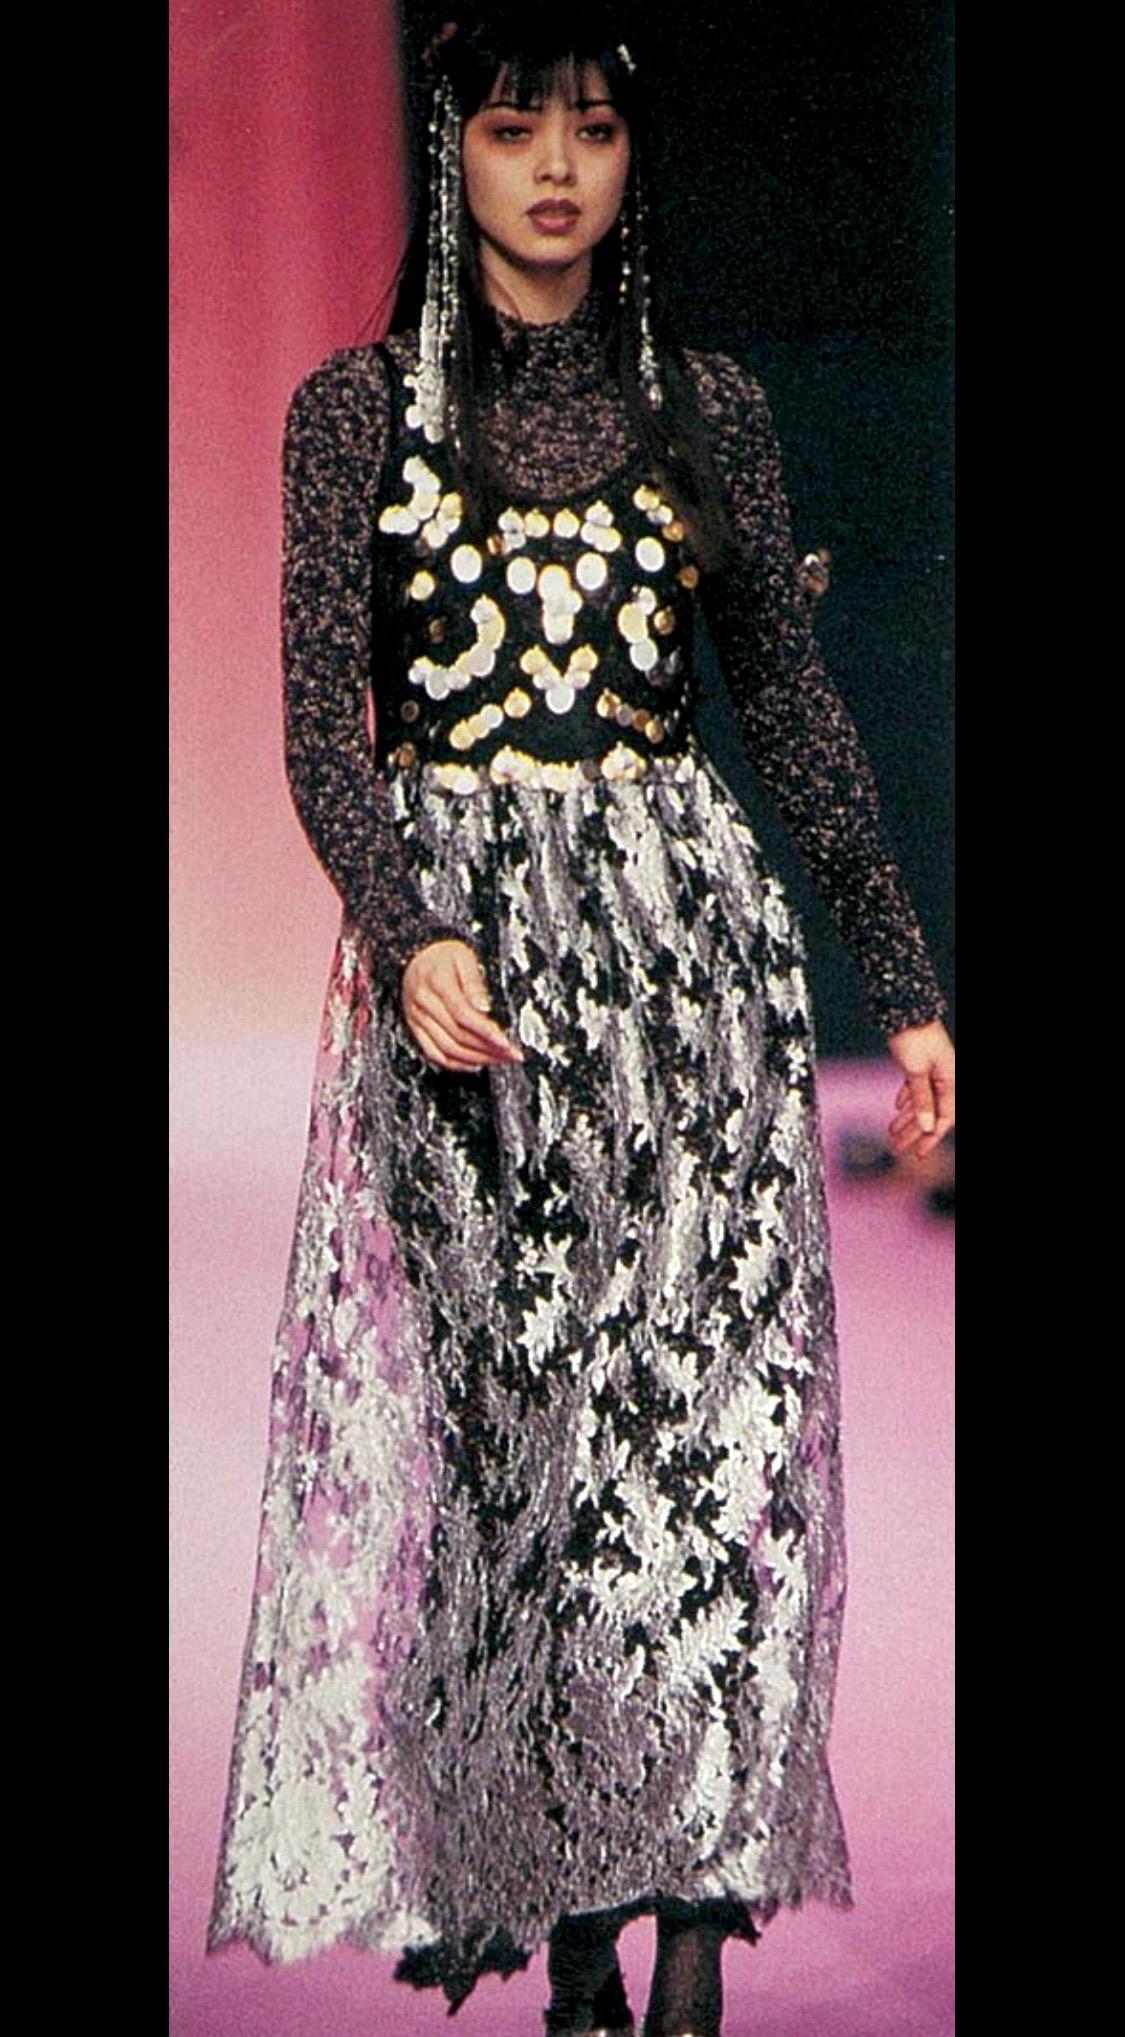 Presenting a beautiful black and silver lace Christian Lacroix pant set. From the Fall/Winter 1994 collection, this incredible lace and tulle combination first appeared as a maxi skirt on the season's runway. This set is comprised of wide-leg